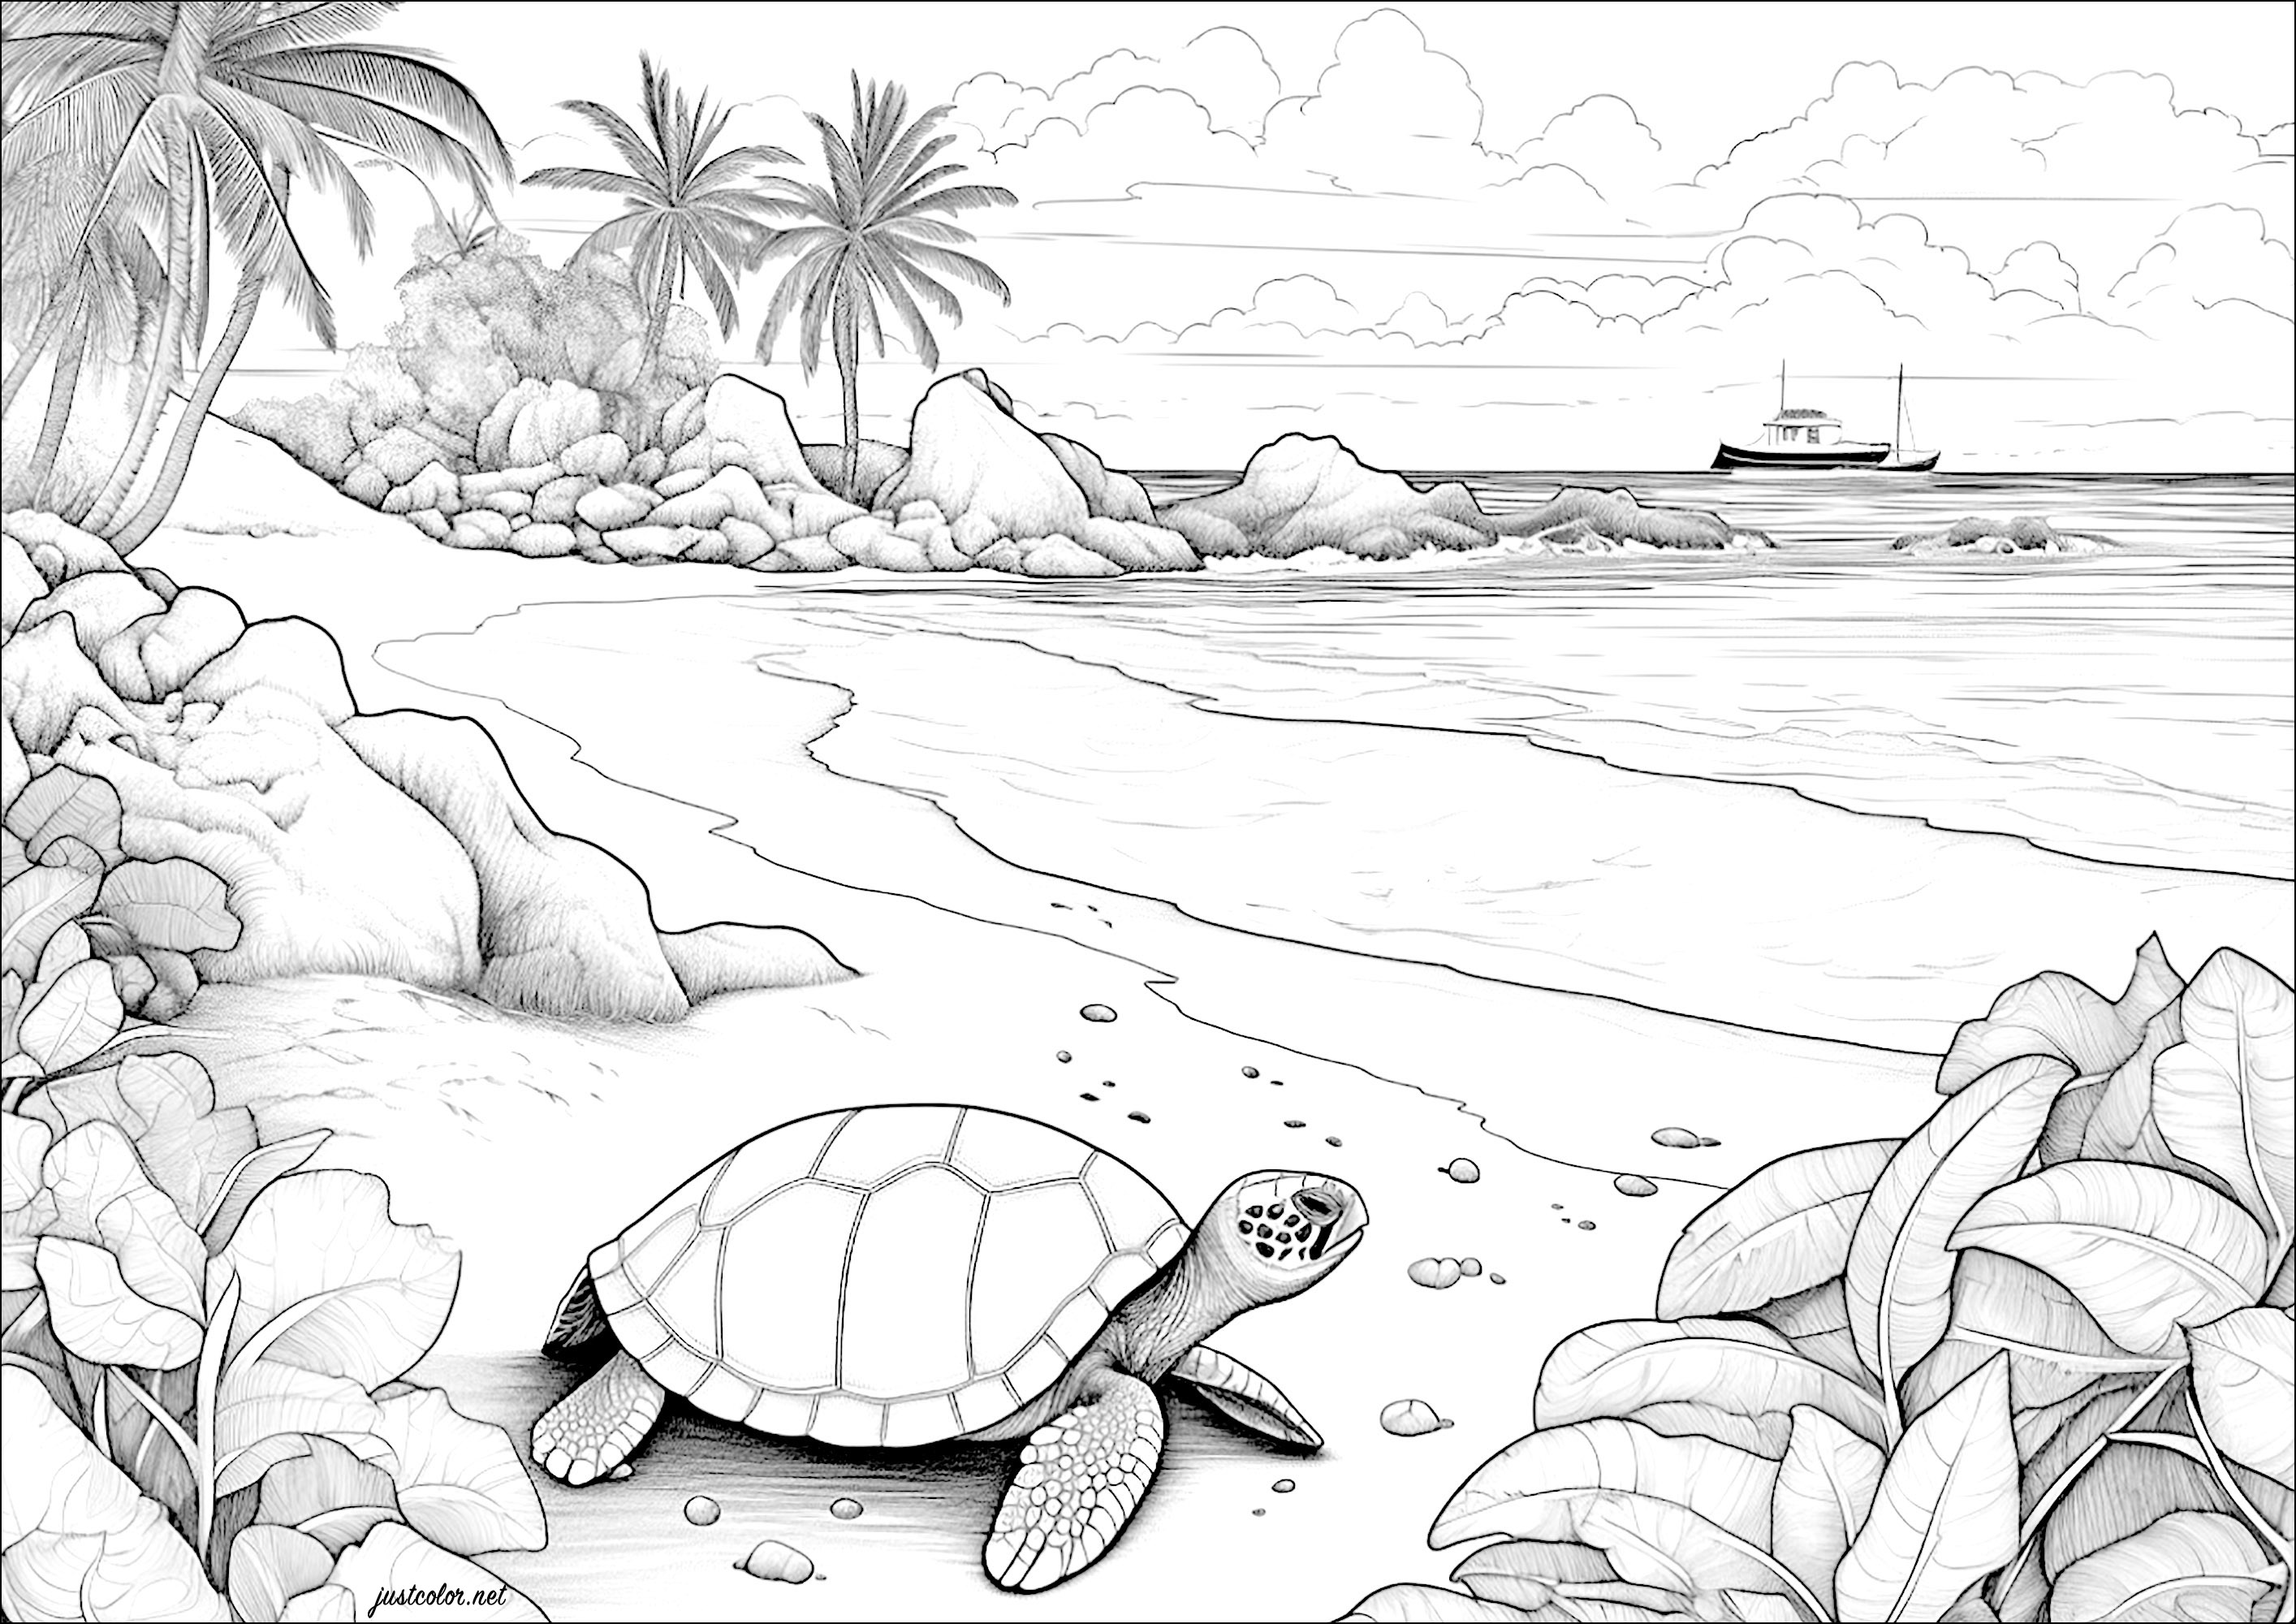 Turtle on a beach with a boat in the distance. Would you like to travel to this island paradise?